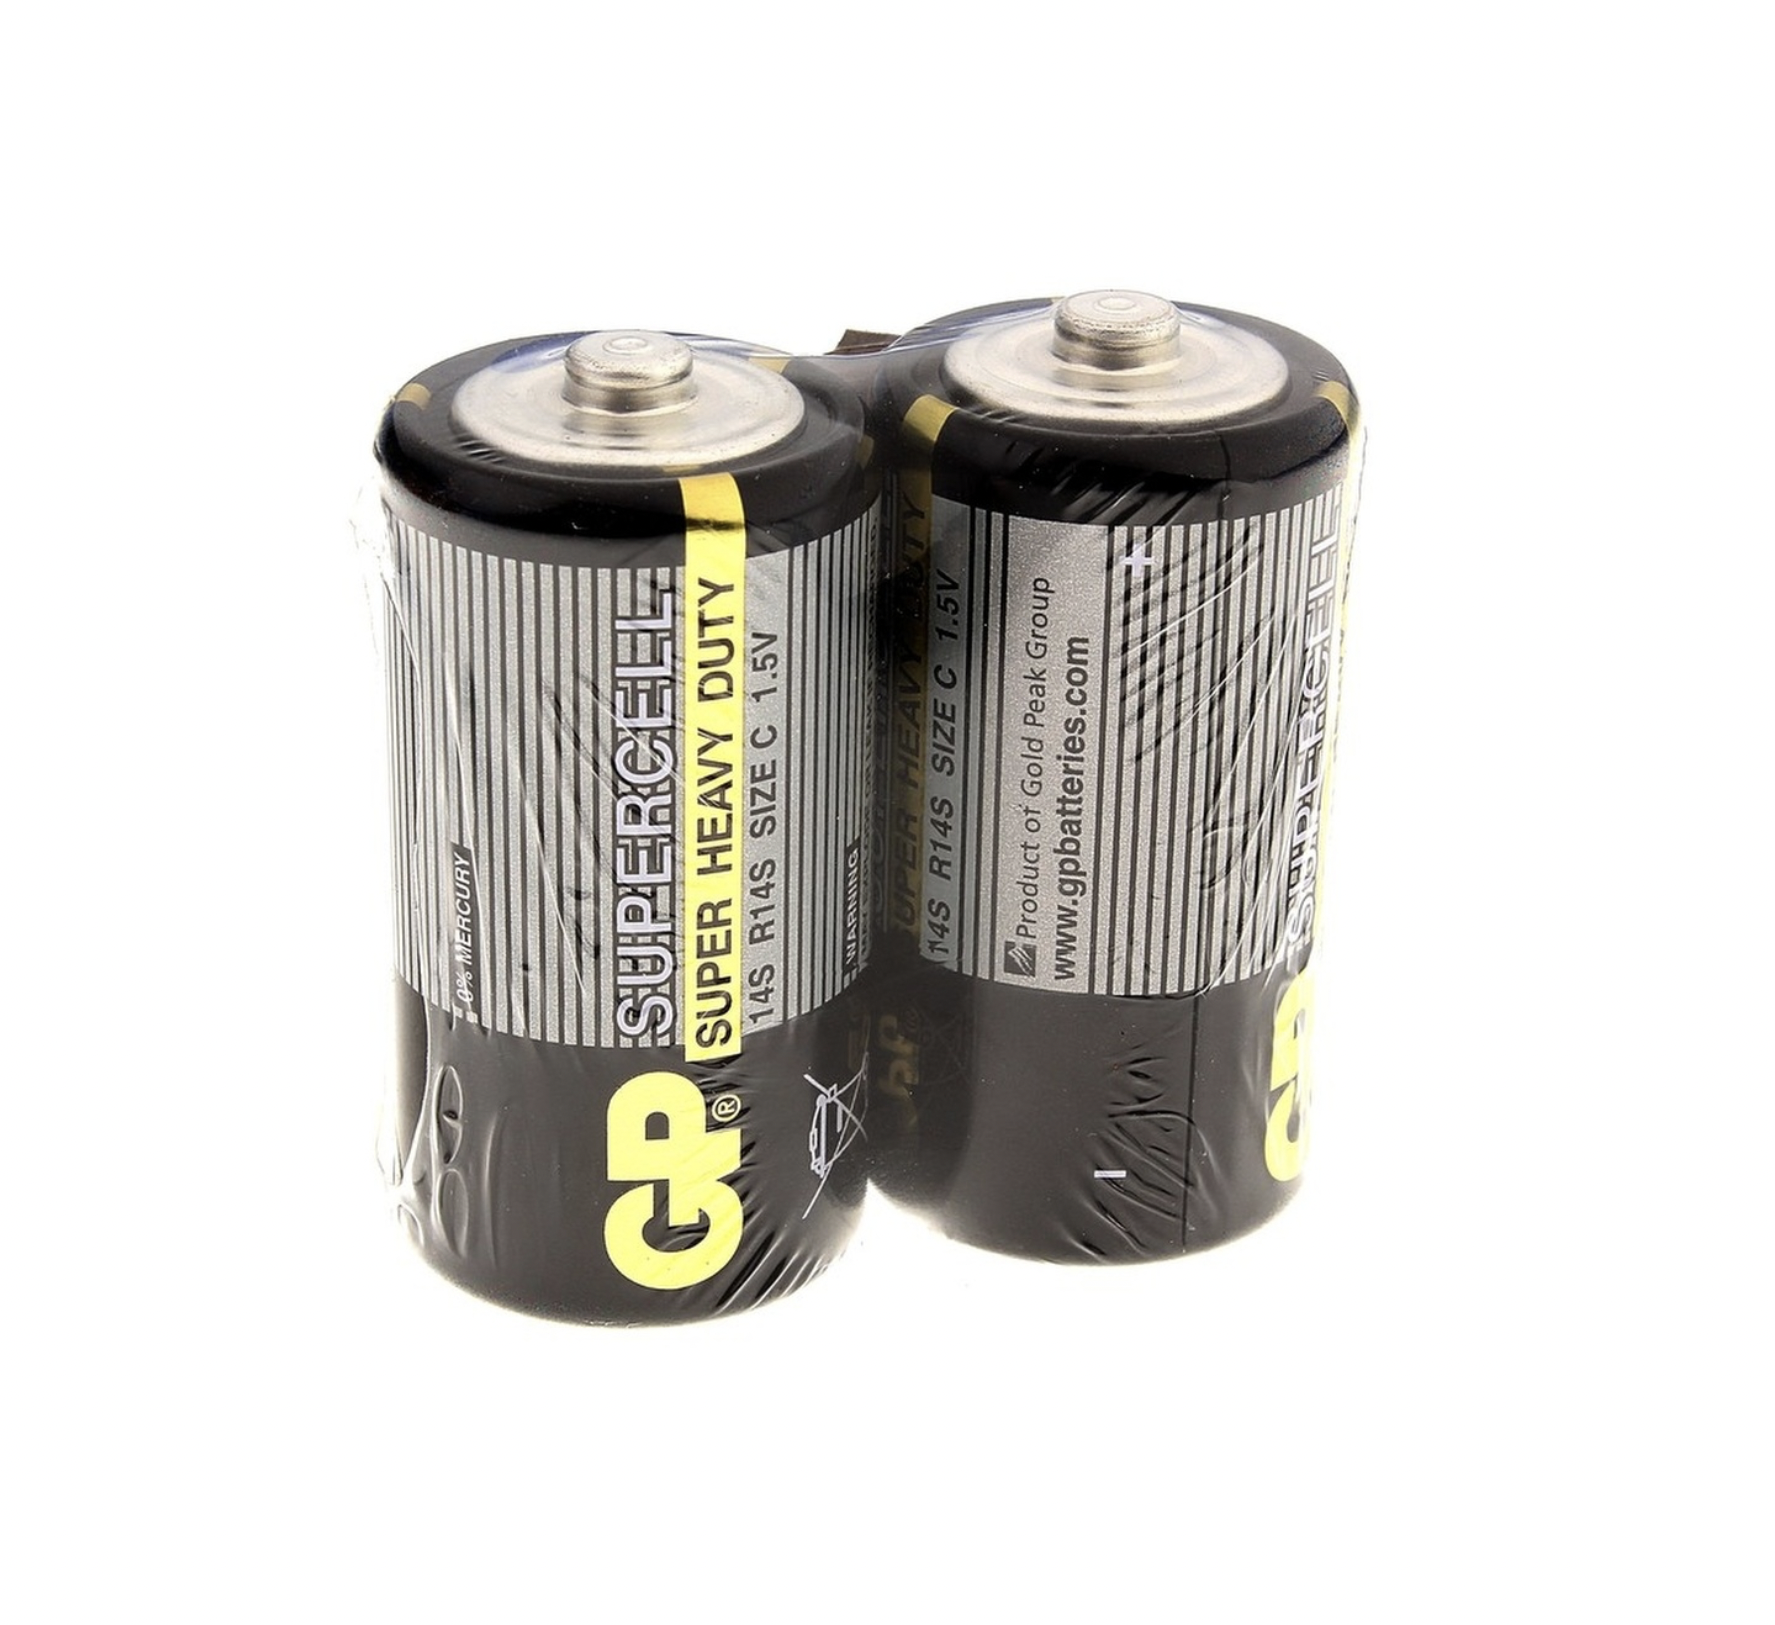  GP -  Supercell Super Heavy Duty 14S R14P Size C 1,5V 2 